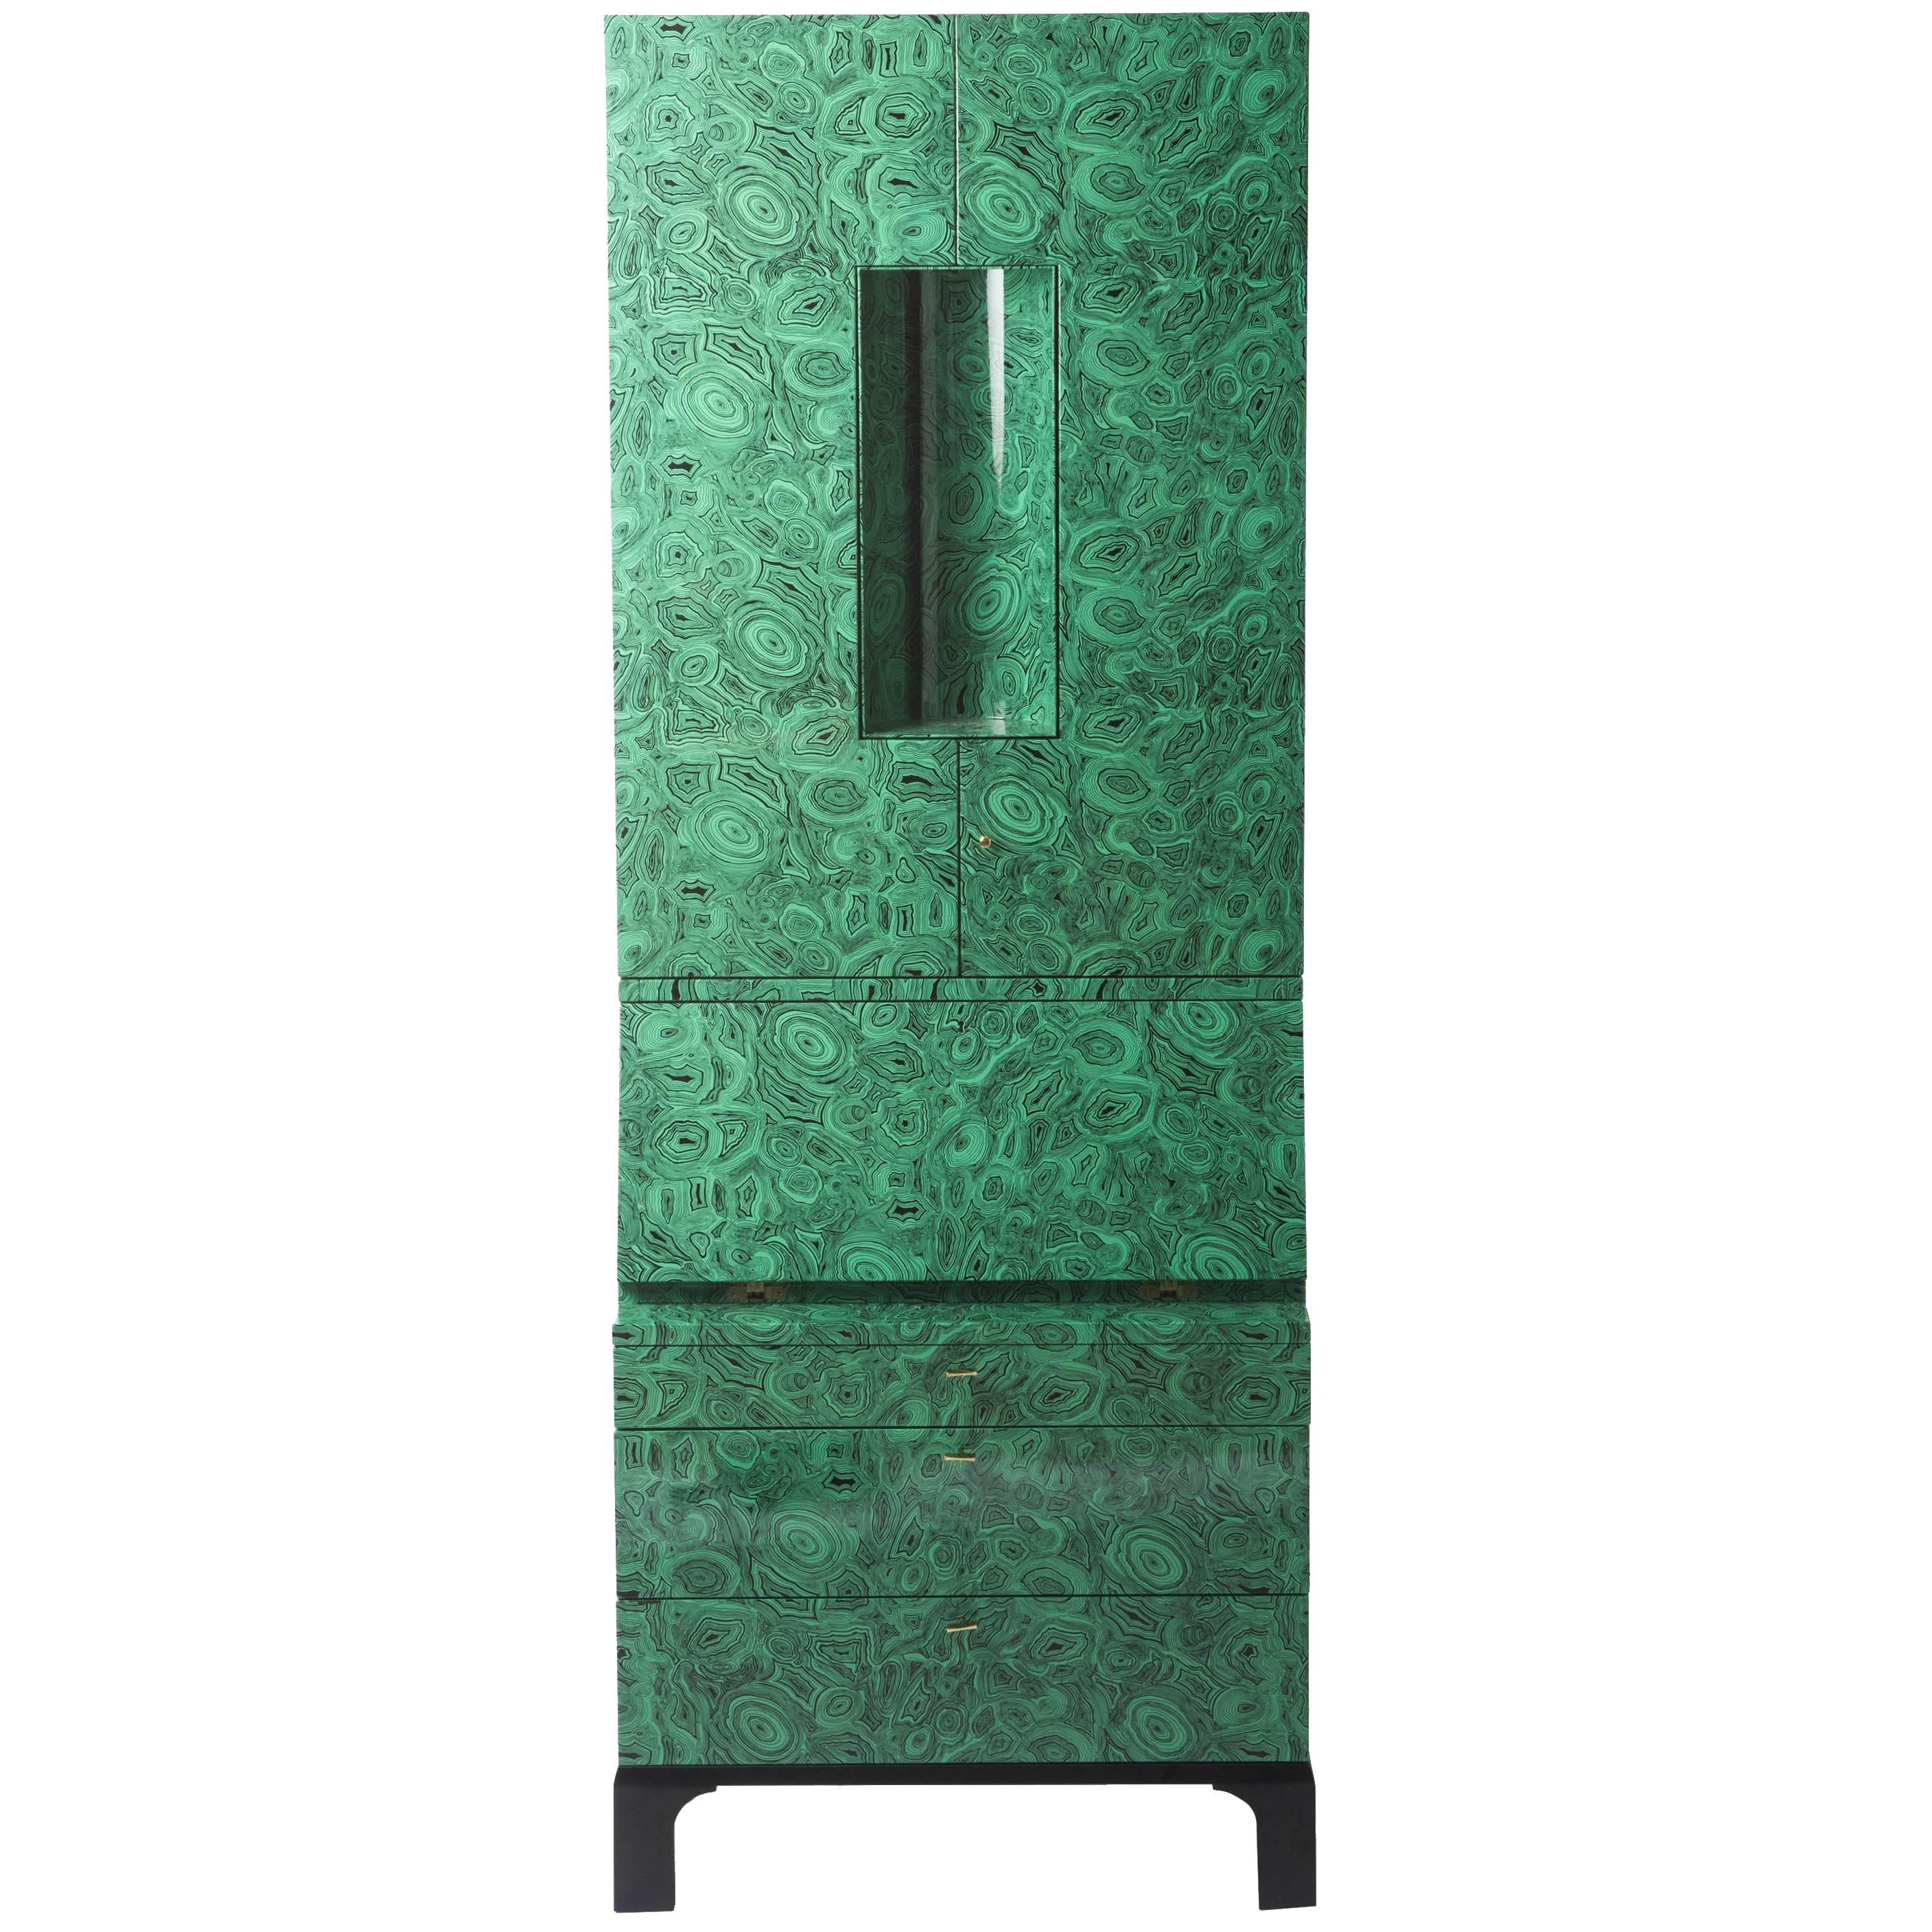 Ateliers Fornasetti "Malachite" trumeau cabinet, Italy 2010 For Sale